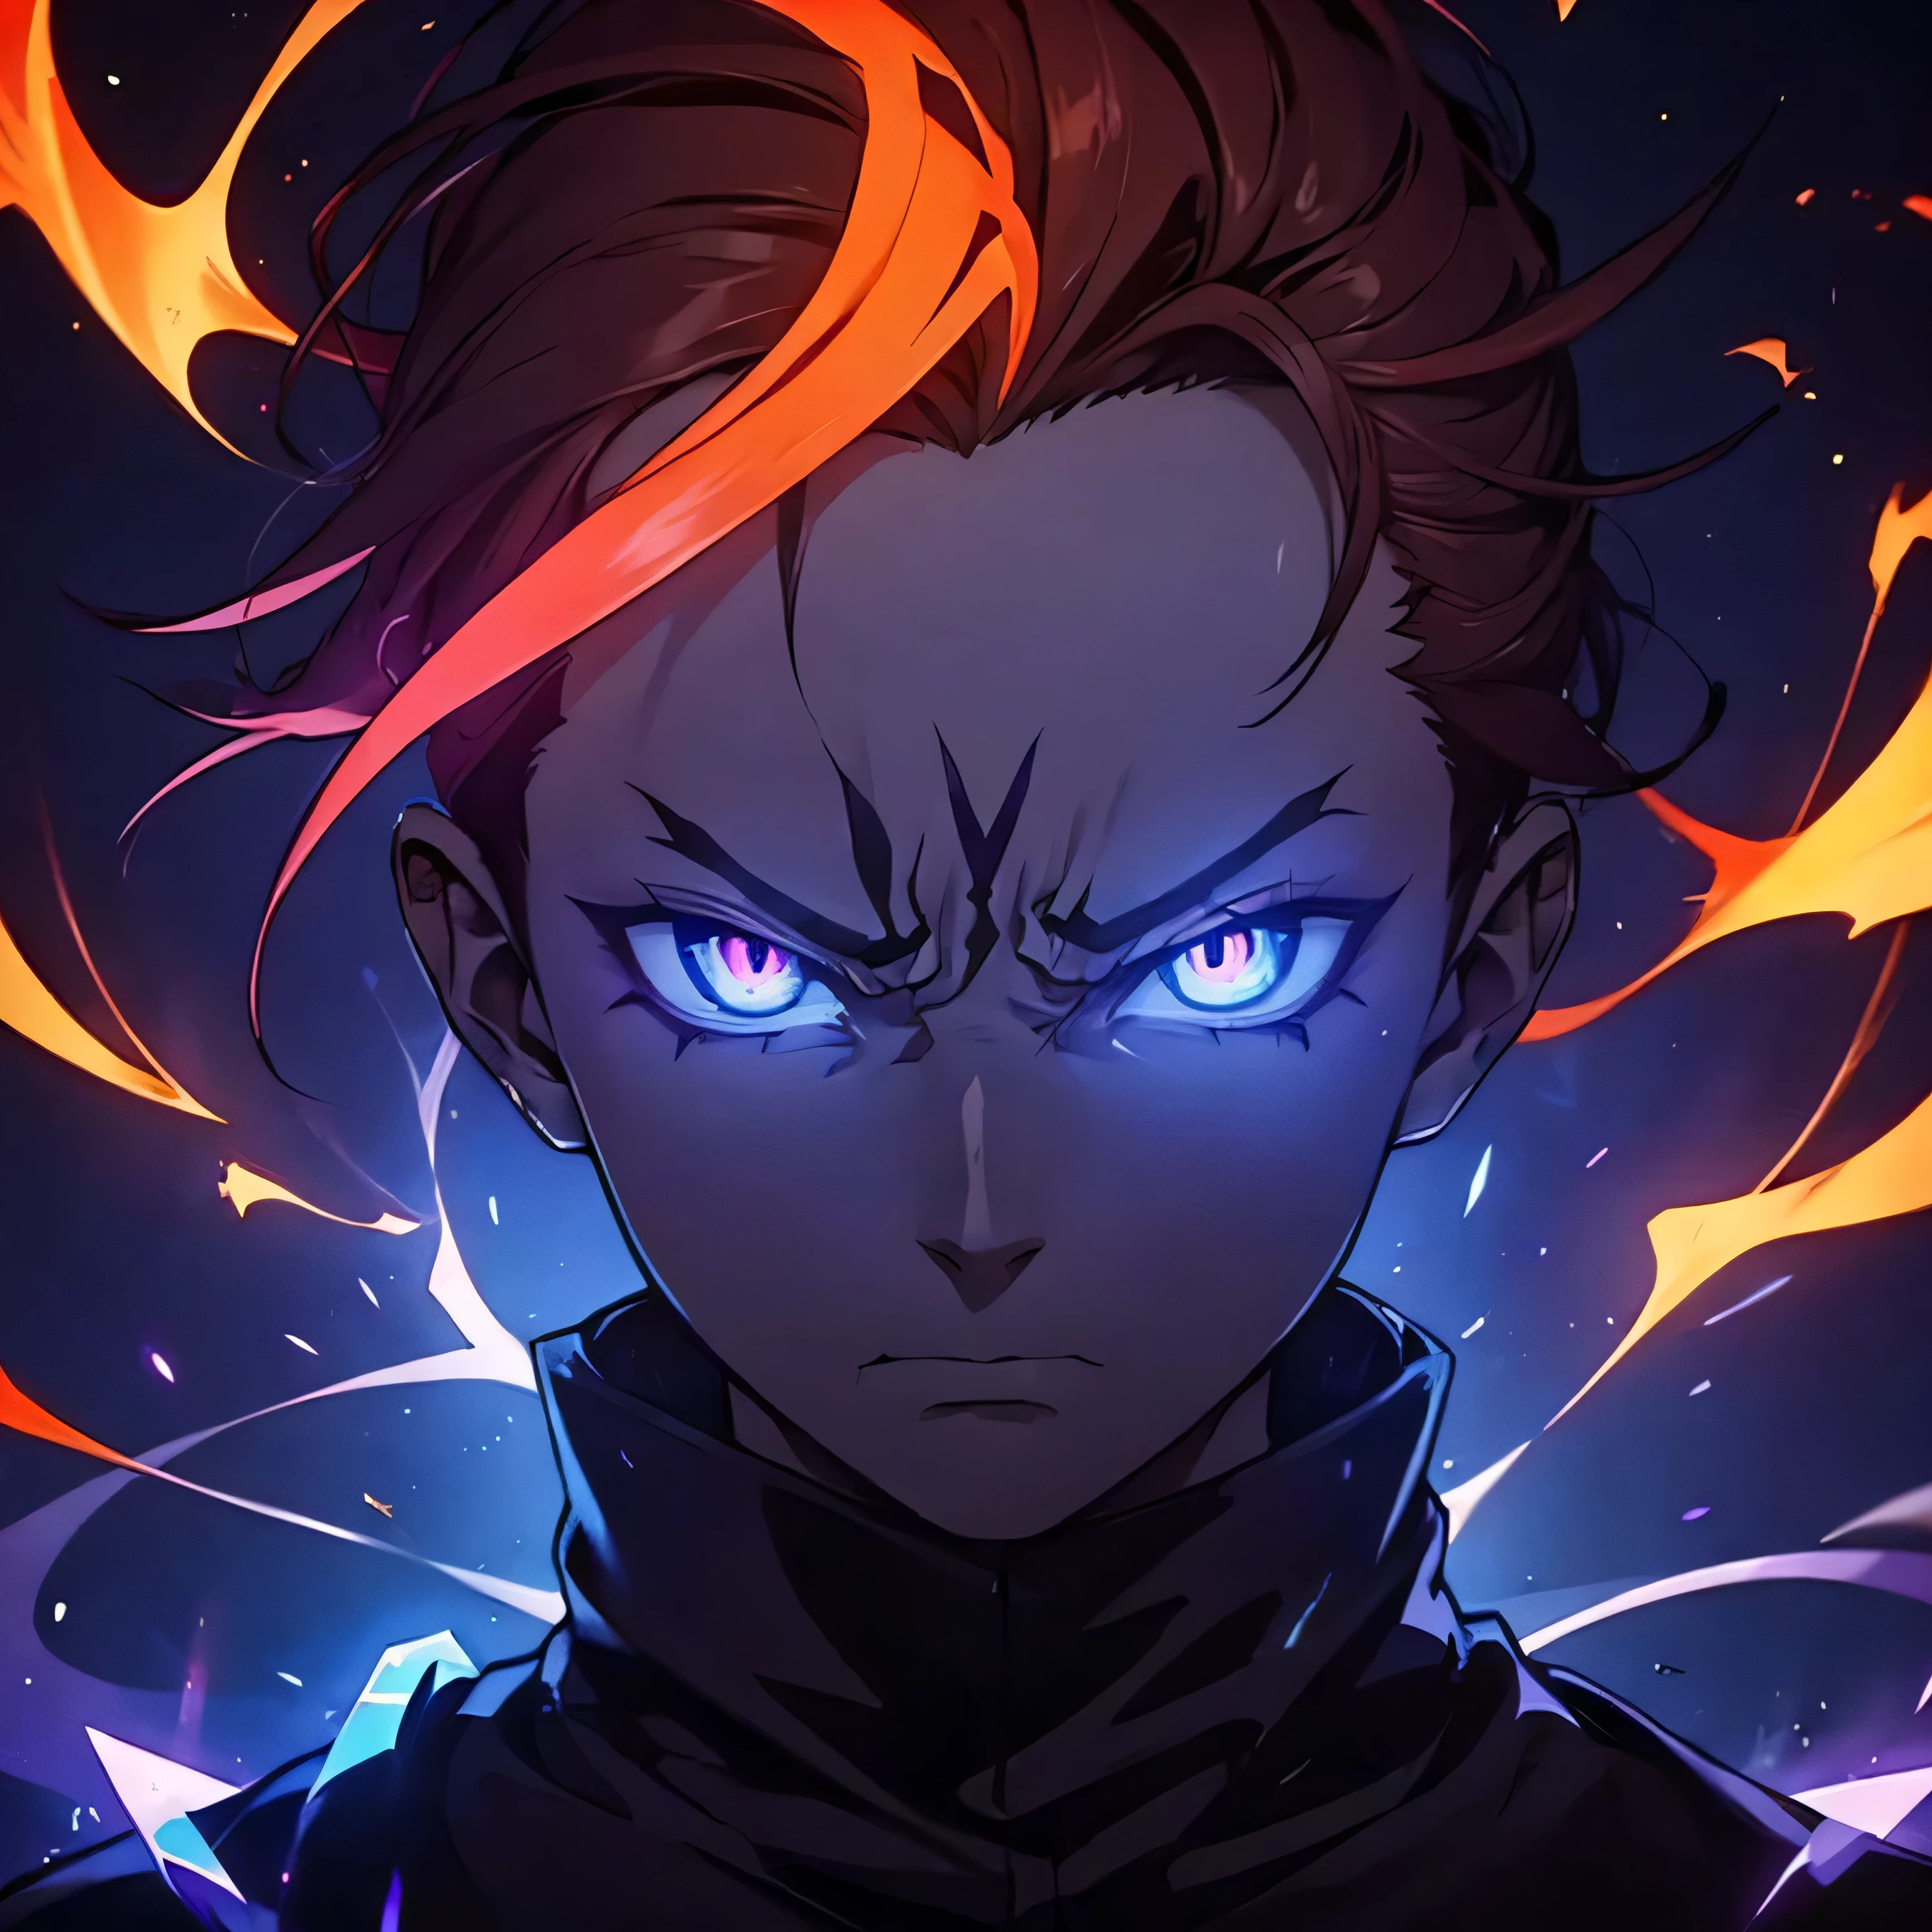 minimalistic, angry face, rap artist, man, dark shadow, left eye blue glowing, right eye purple glowing eye, a third eye in the middle of forehead, orange hair, with clean background, special effects, electric aura